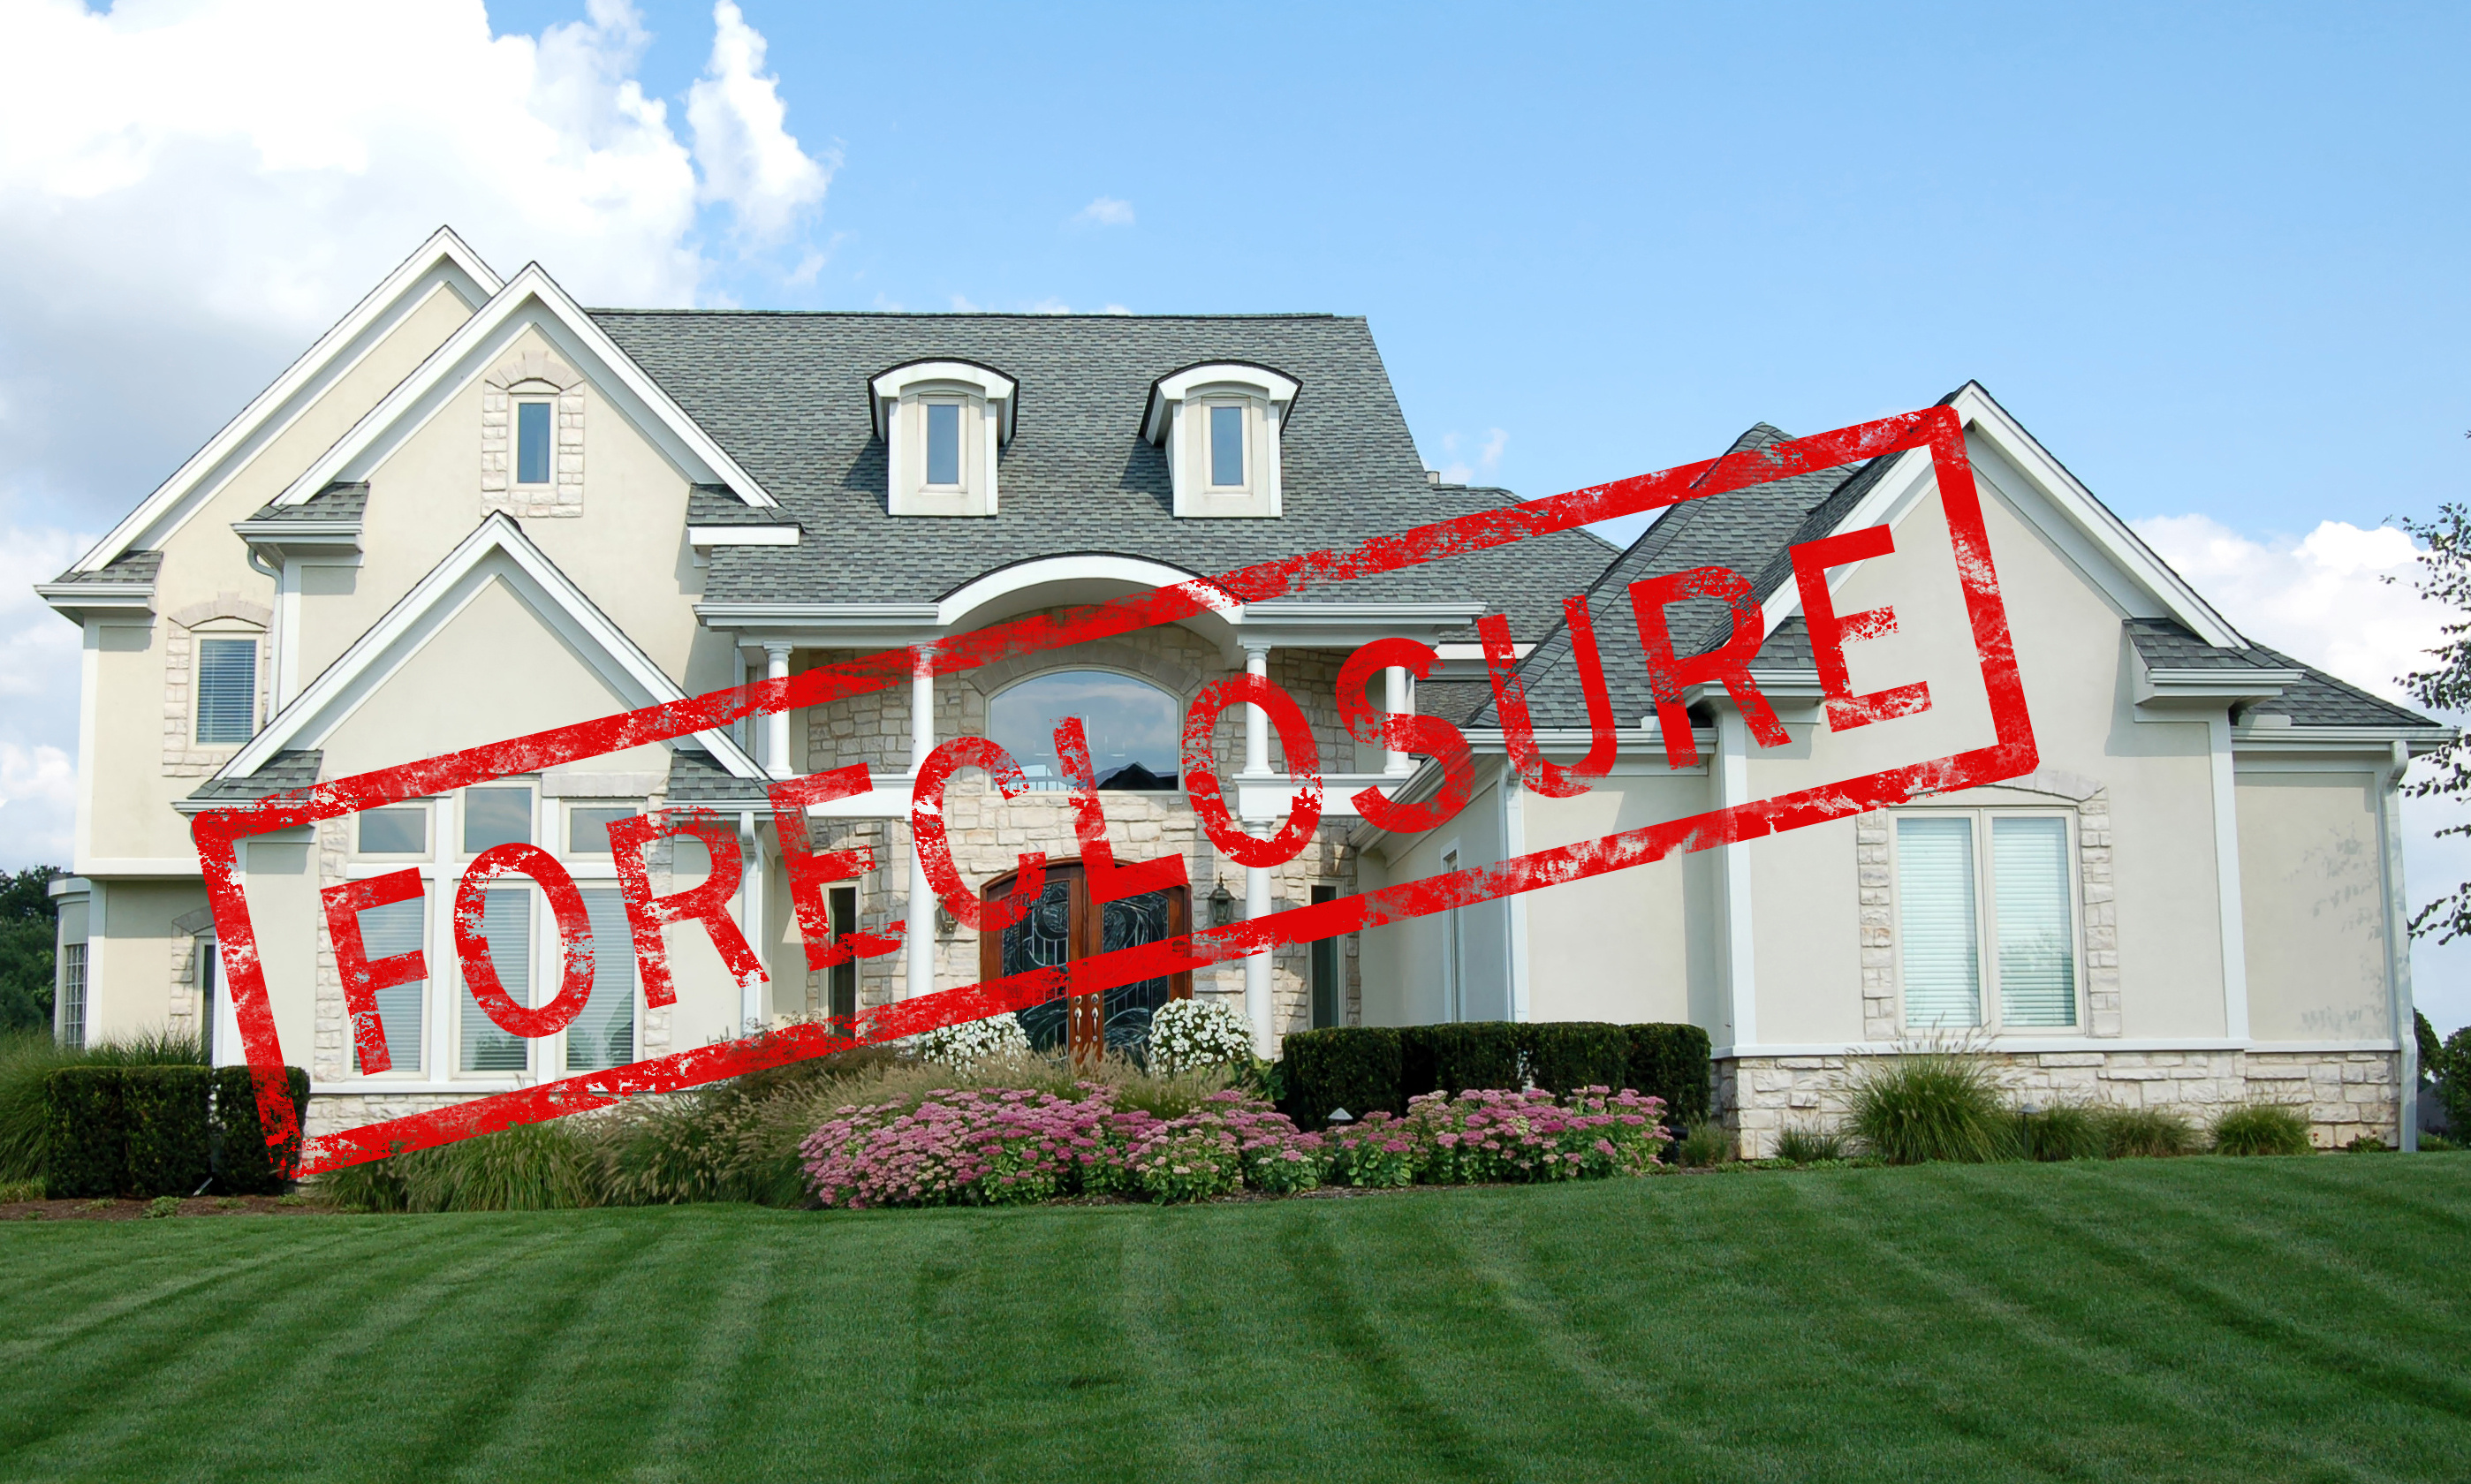 Call Appraisal House, Inc. when you need appraisals on Okaloosa foreclosures